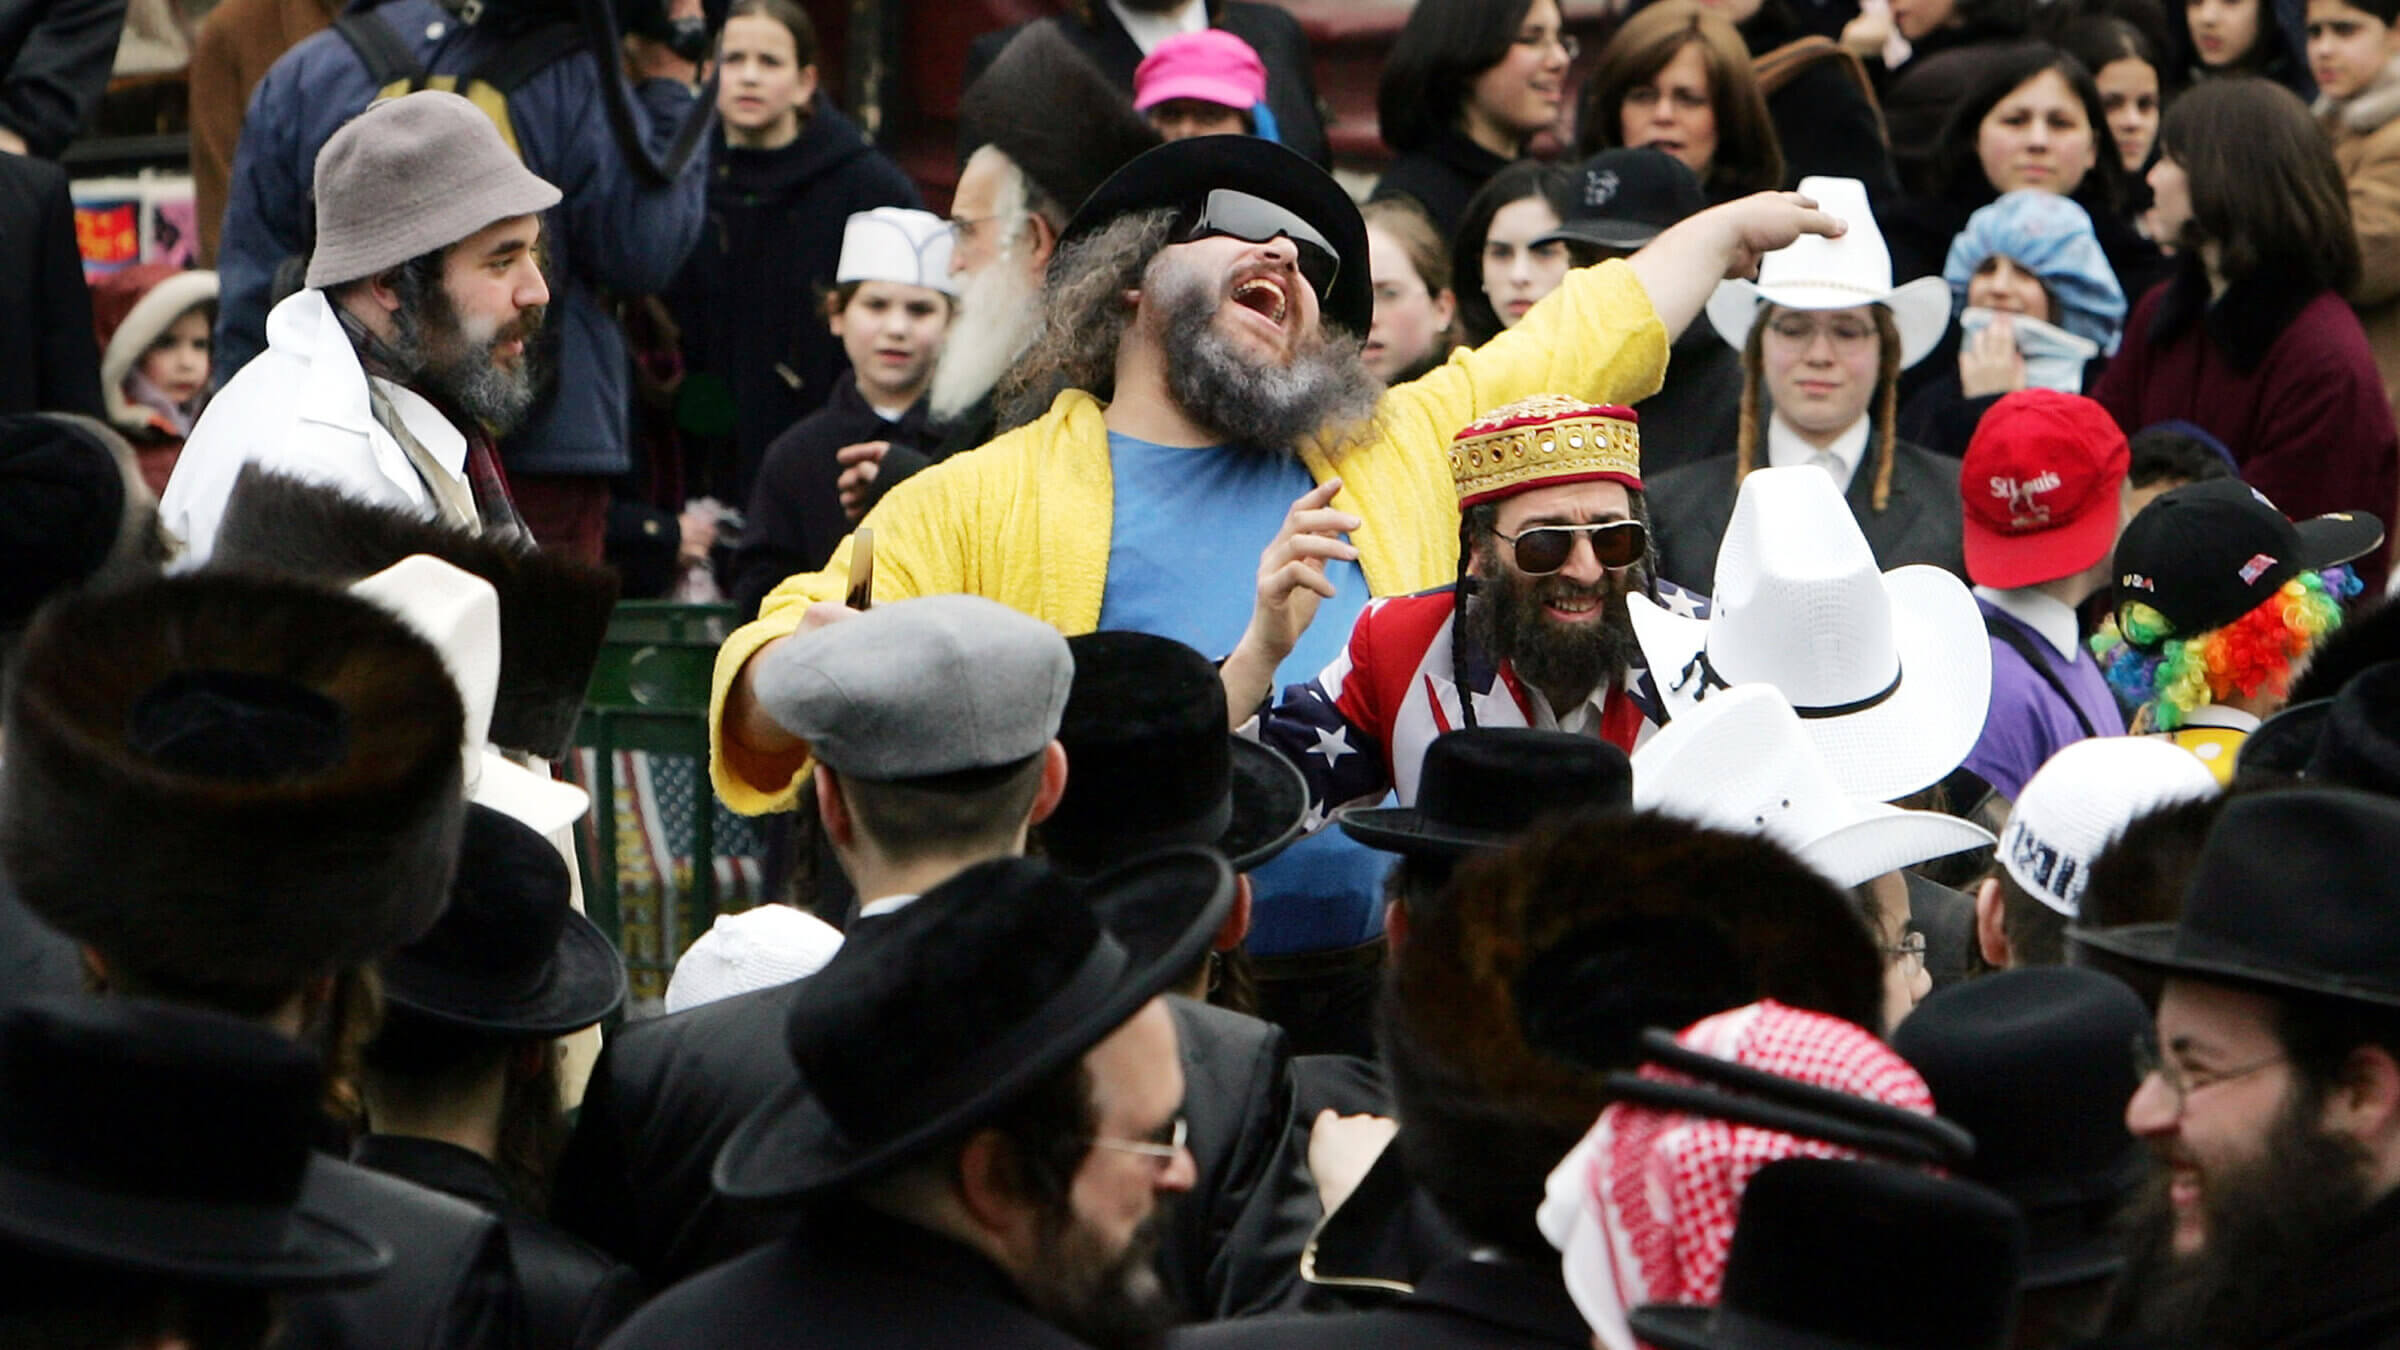 NEW YORK - MARCH 25:  Jews dance in costumes and cowboy hats during Purim festivities in the Williamsburg section of Brooklyn in 2005. 